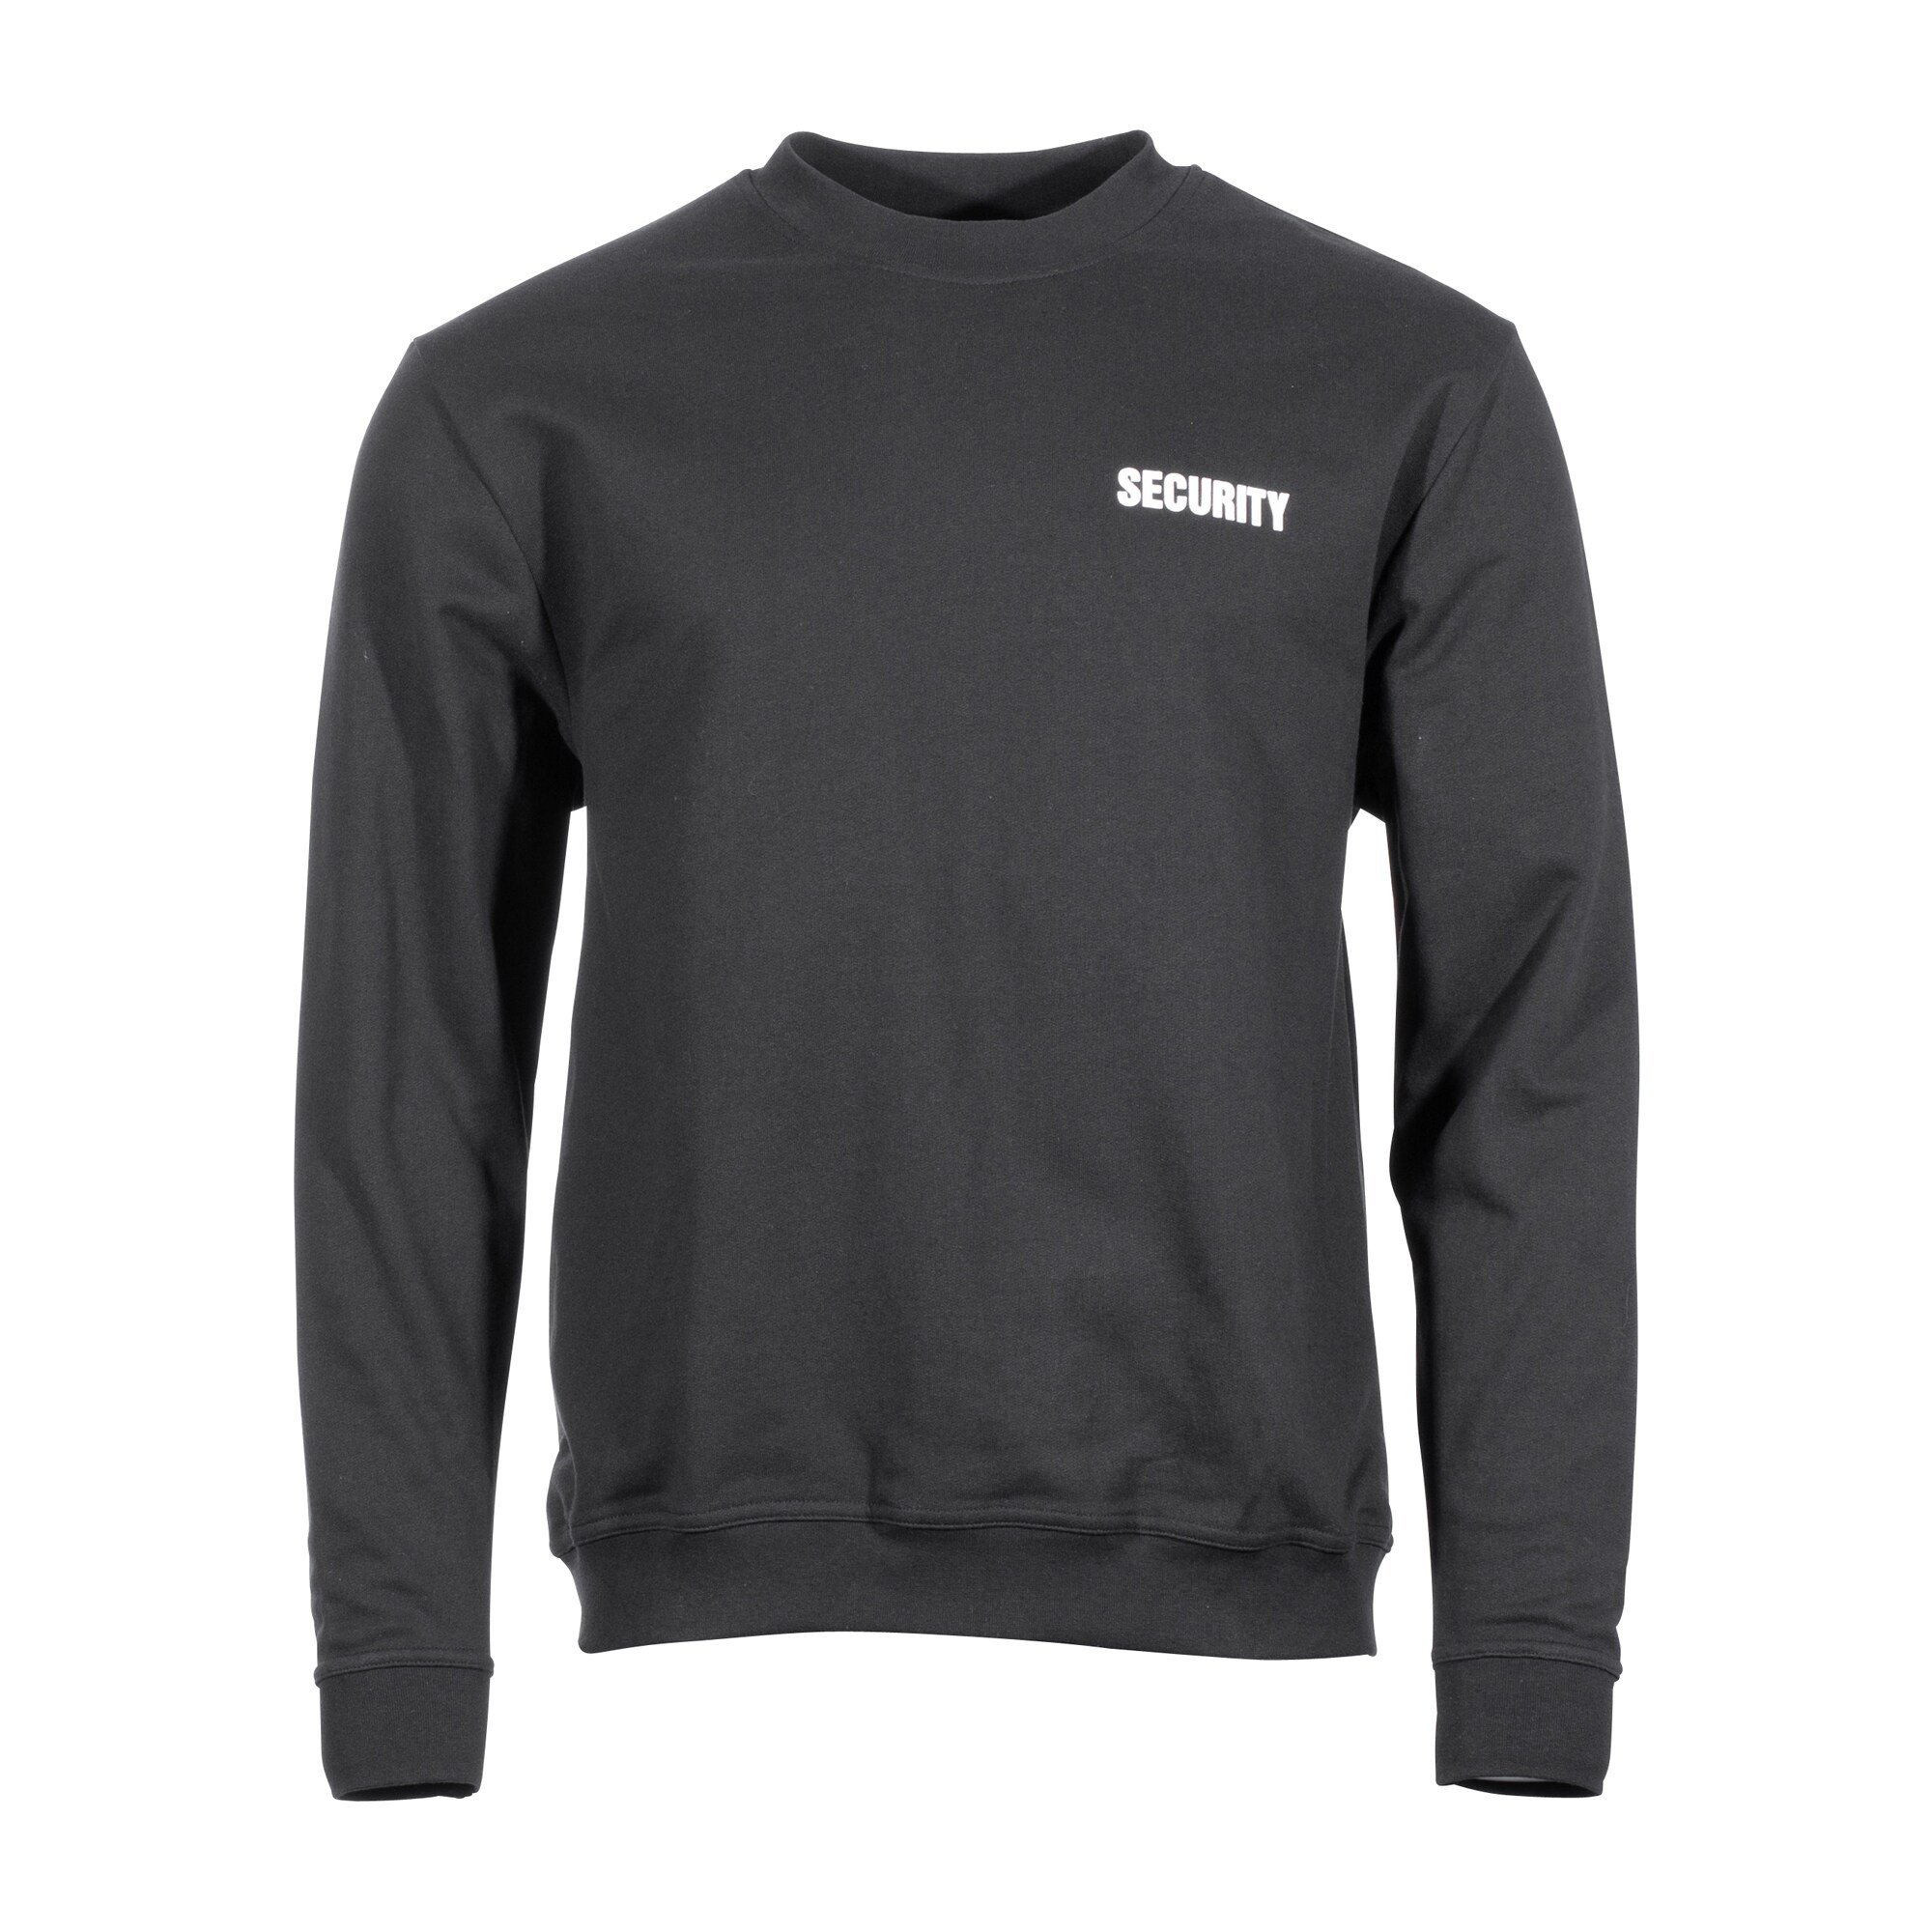 Purchase the Sweatshirt Security by ASMC